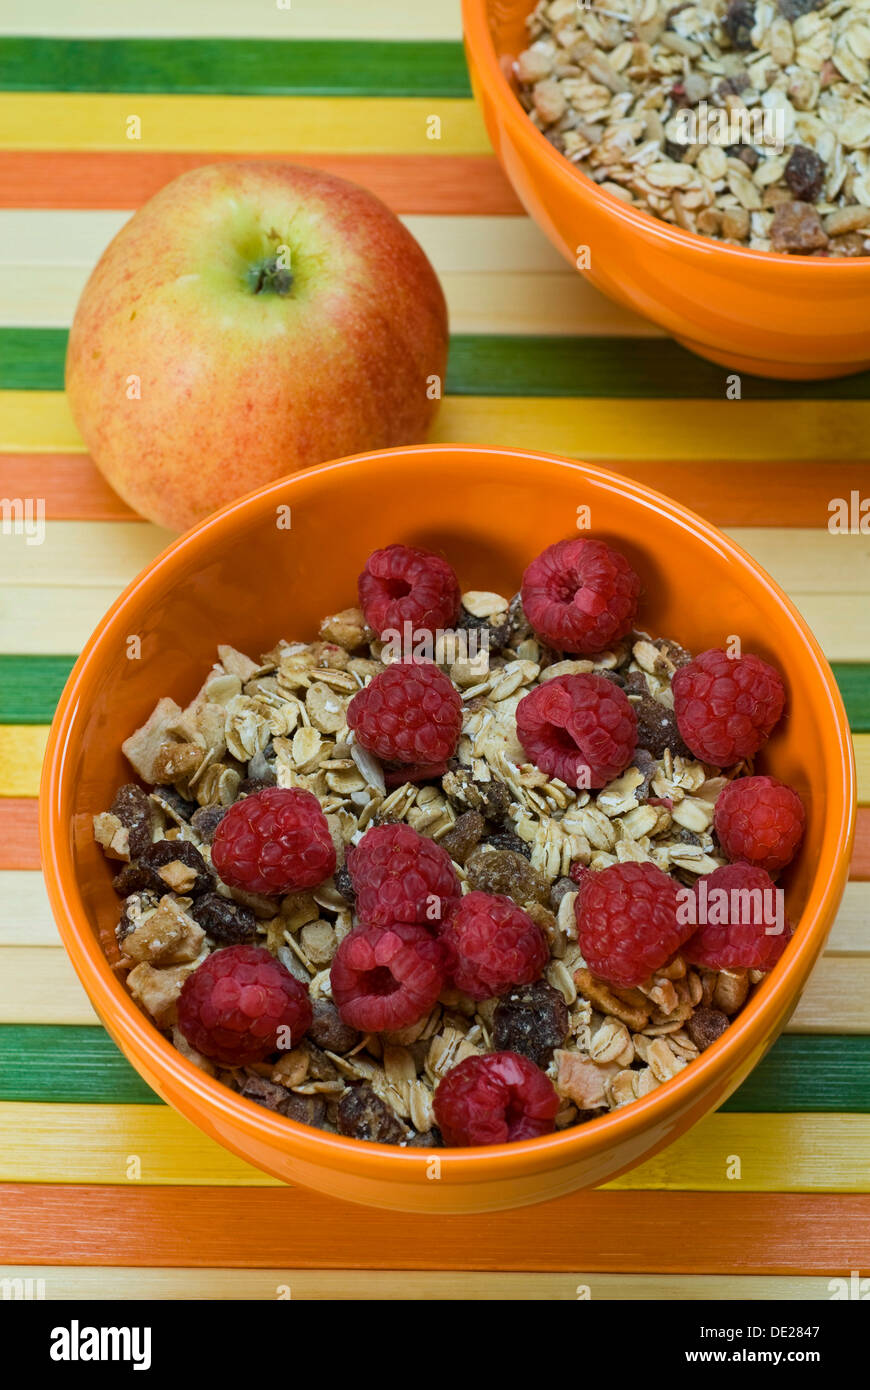 Fruit muesli with raspberries and an apple Stock Photo